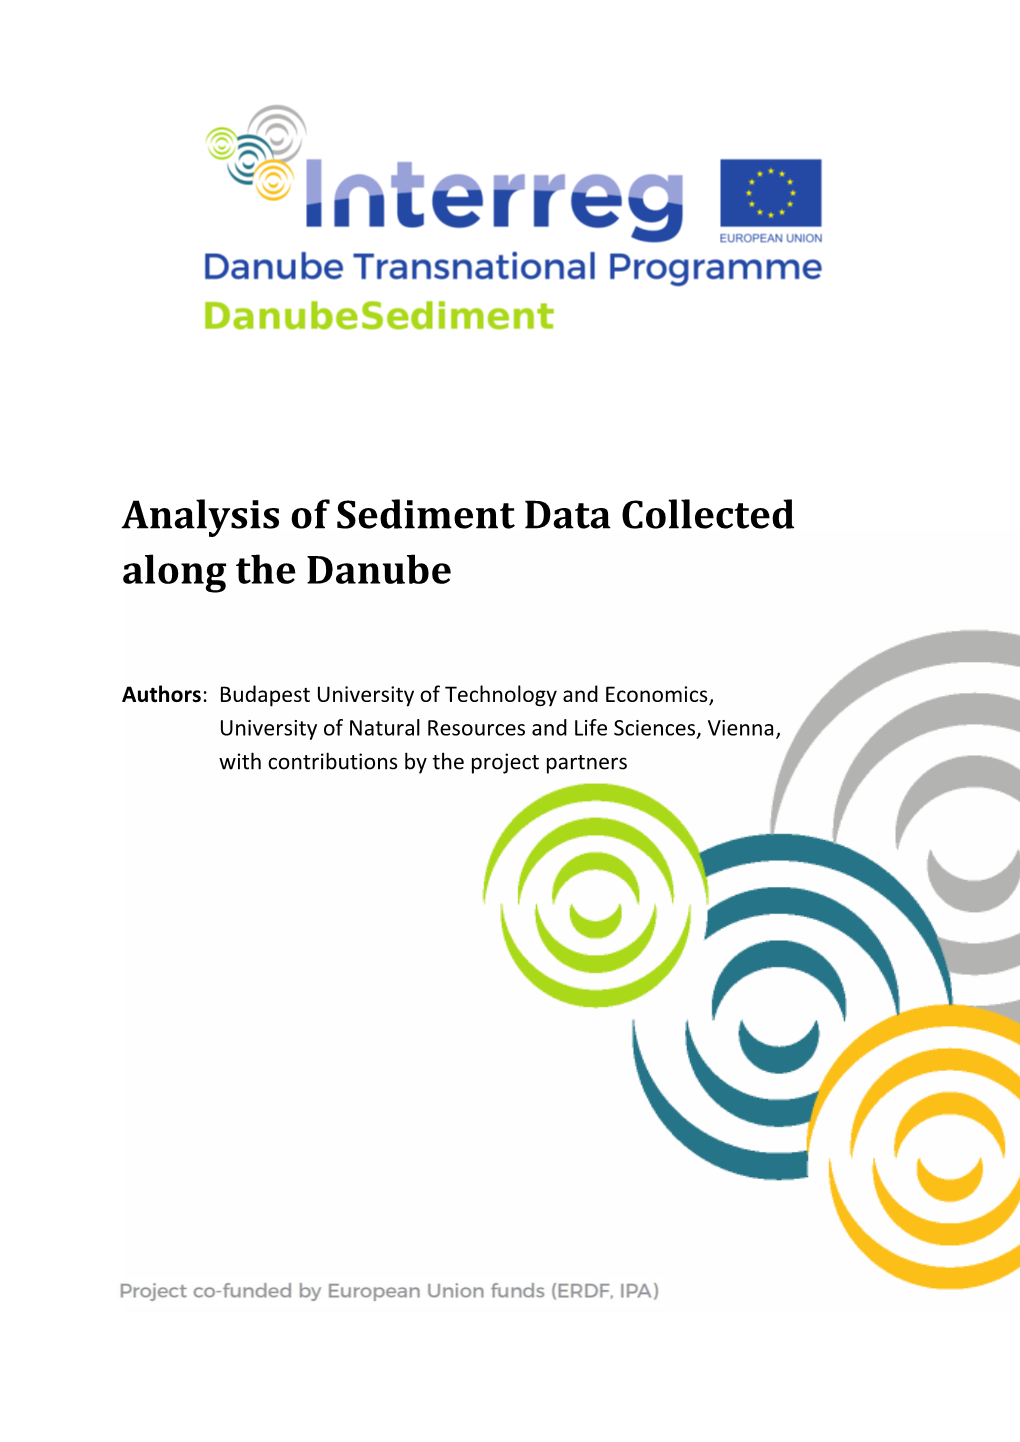 Analysis of Sediment Data Collected Along the Danube